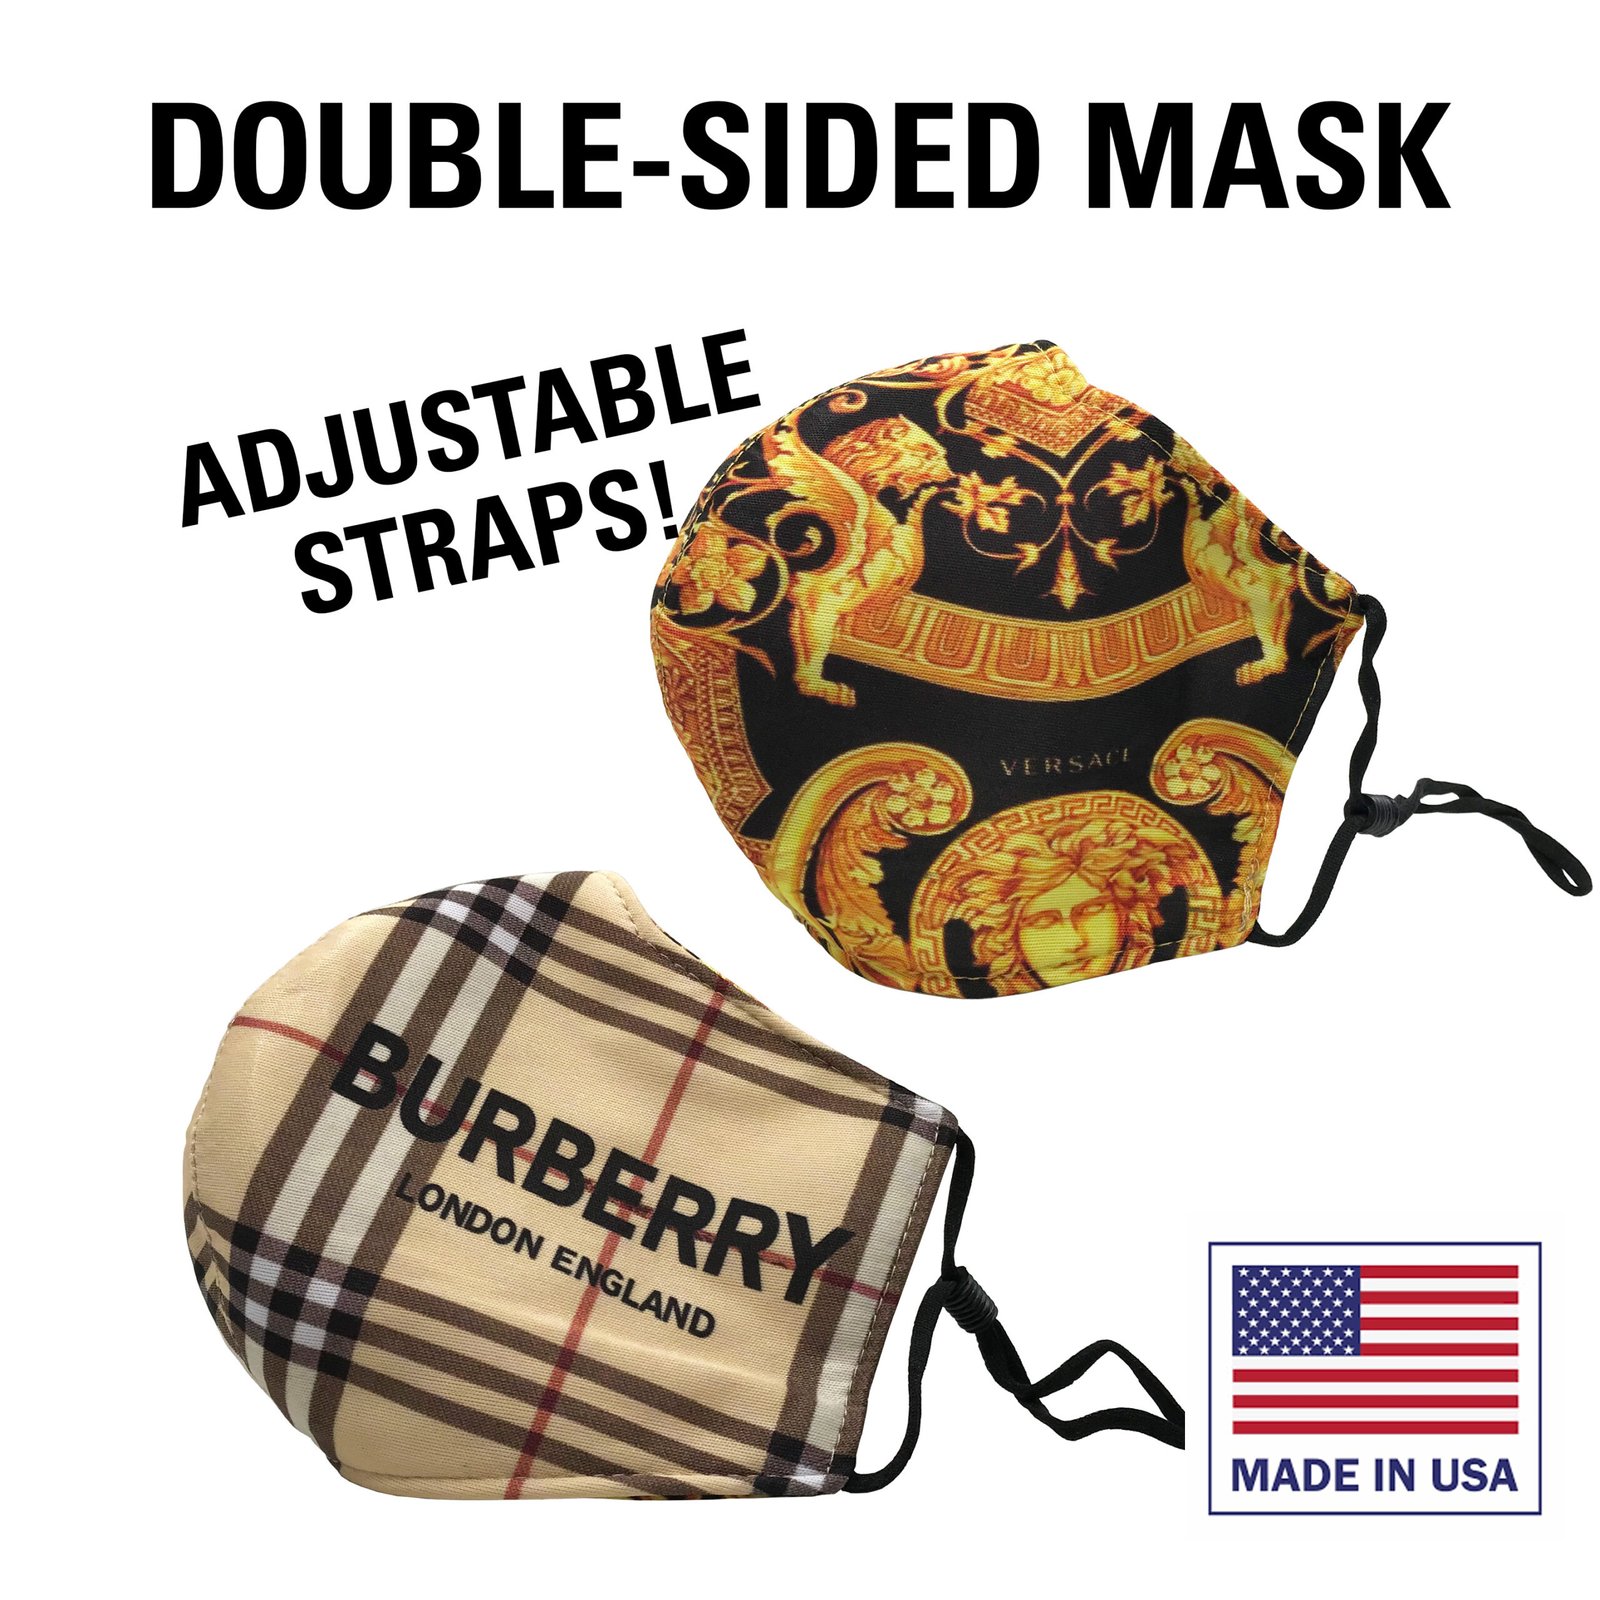 Double-Sided Adult Washable Cloth Masks - Adjustable Straps (Gucci and Louis  Vuitton) - BioMed Health & Wellness: Medical Essentials and PPE Gear